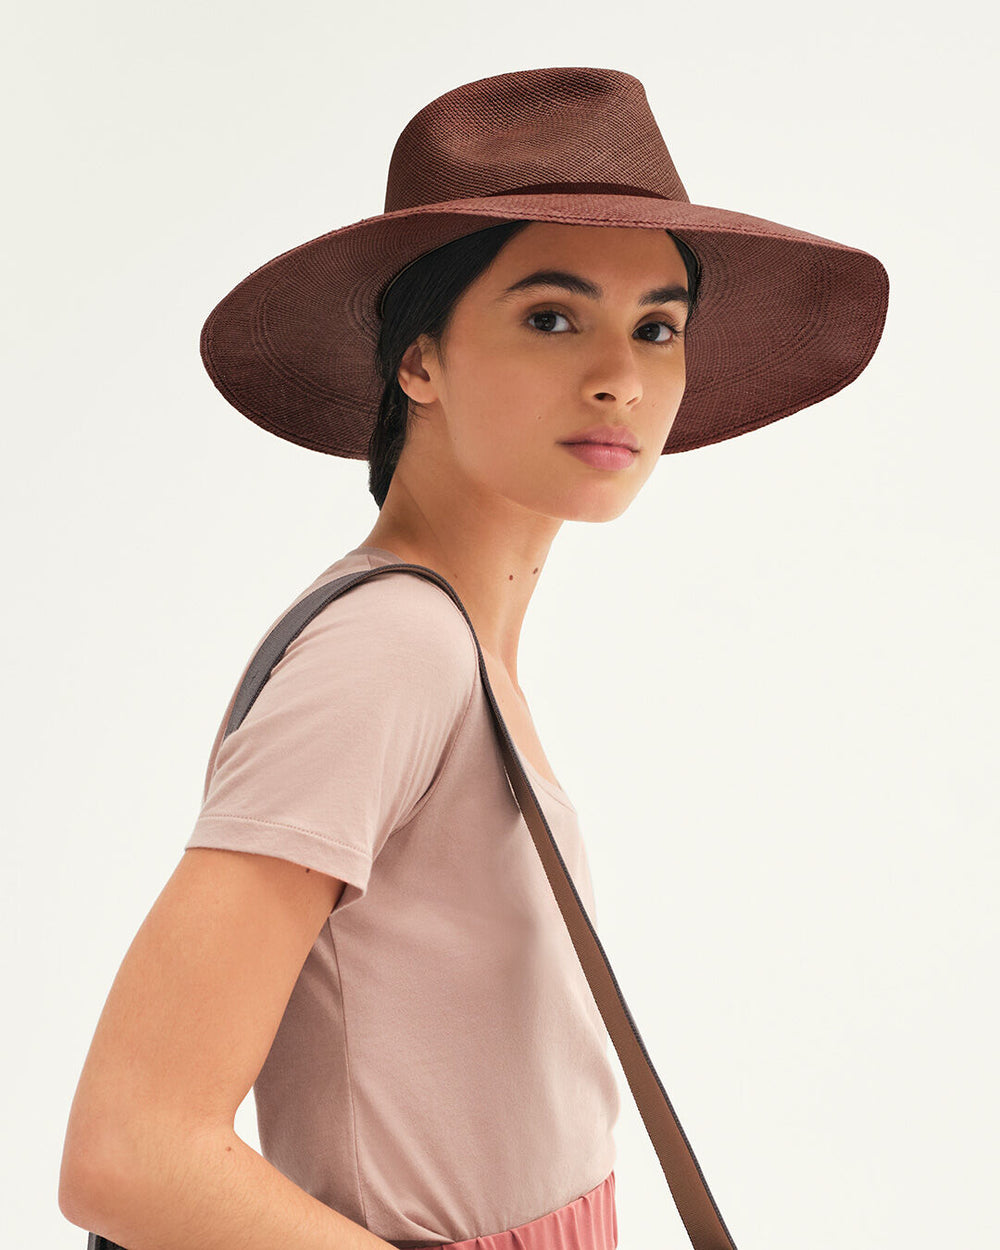 Woman wearing a wide-brimmed hat and a shoulder bag looking at the camera.